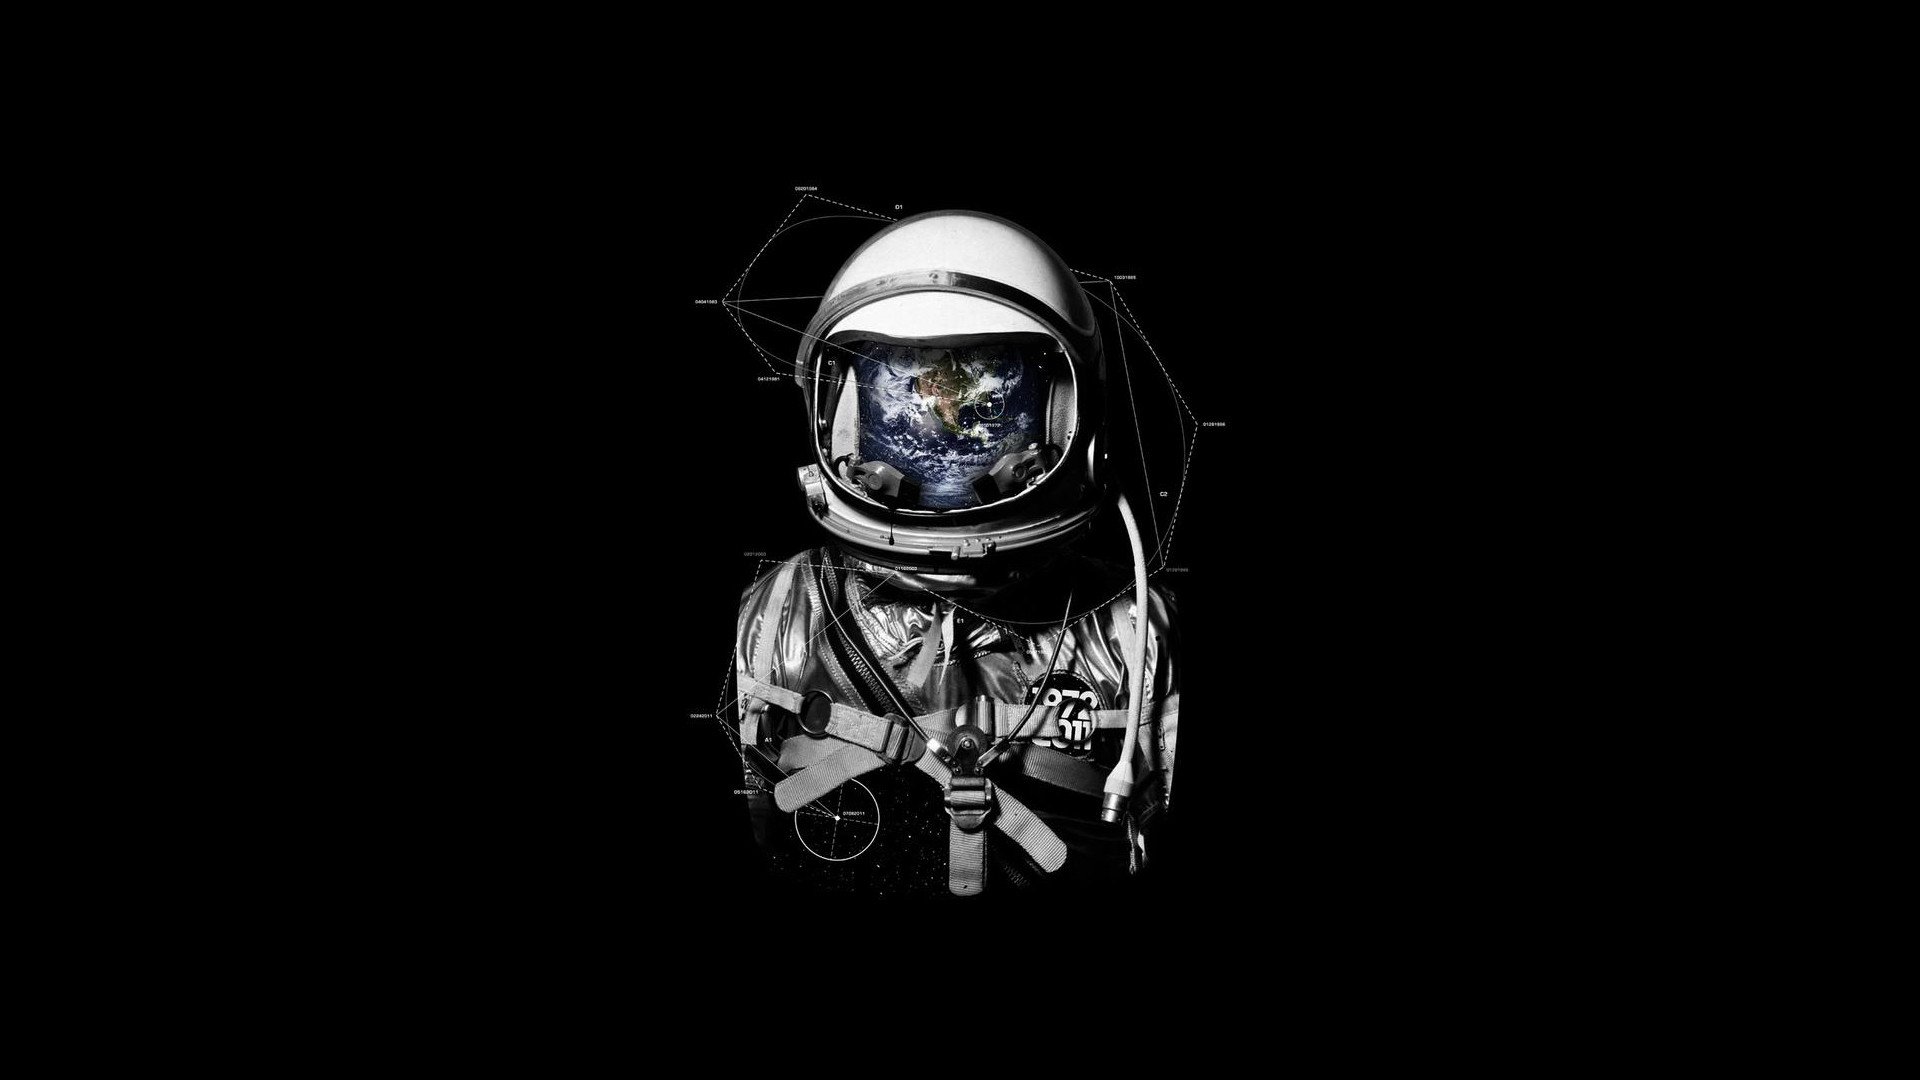 1920x1080 113 Astronaut HD Wallpapers | Backgrounds - Wallpaper Abyss - Page 2